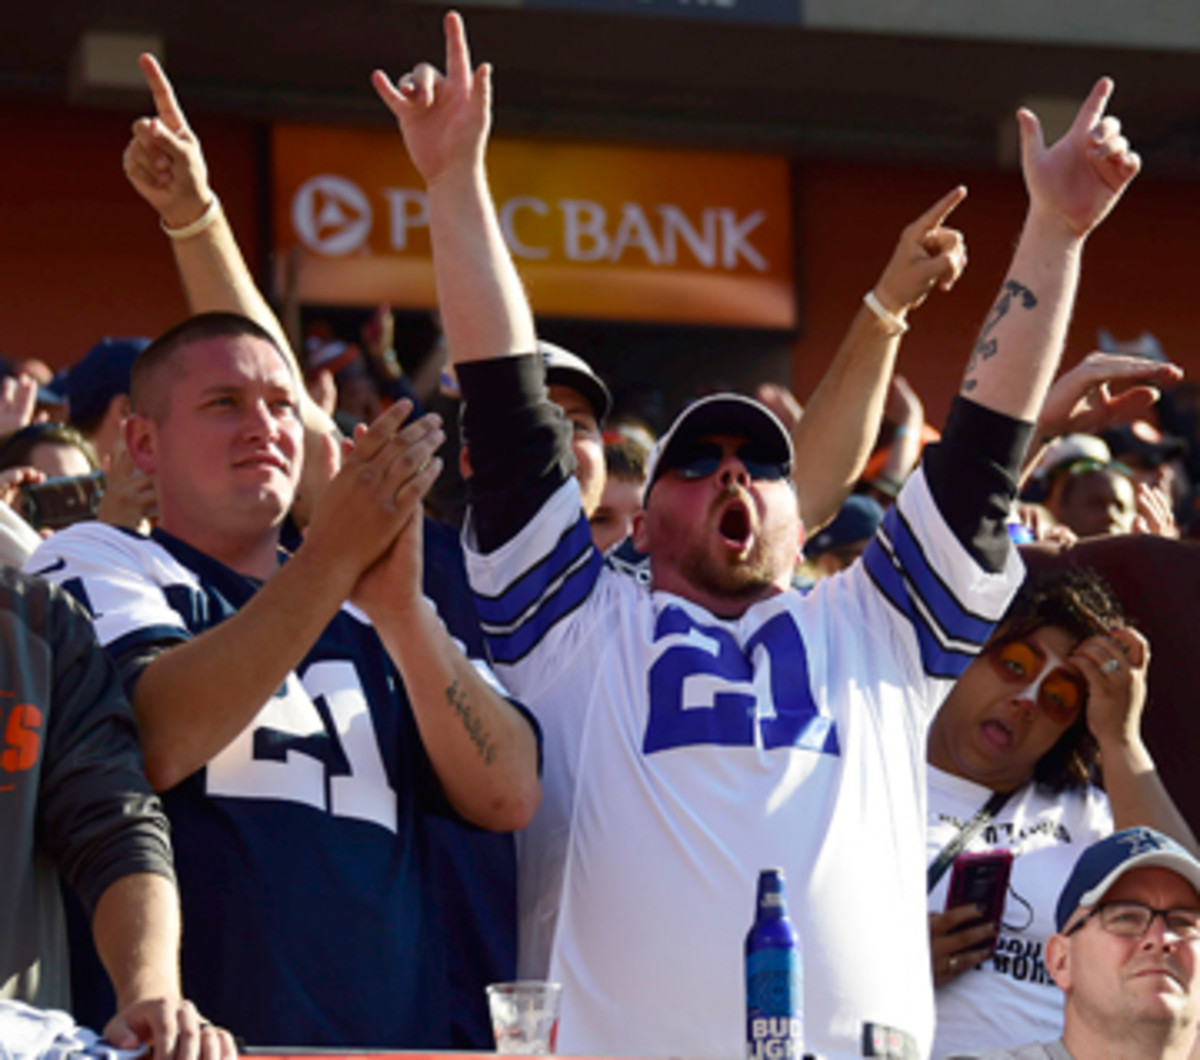 Dallas Cowboys apparel, gear for NFL game days - Sports Illustrated